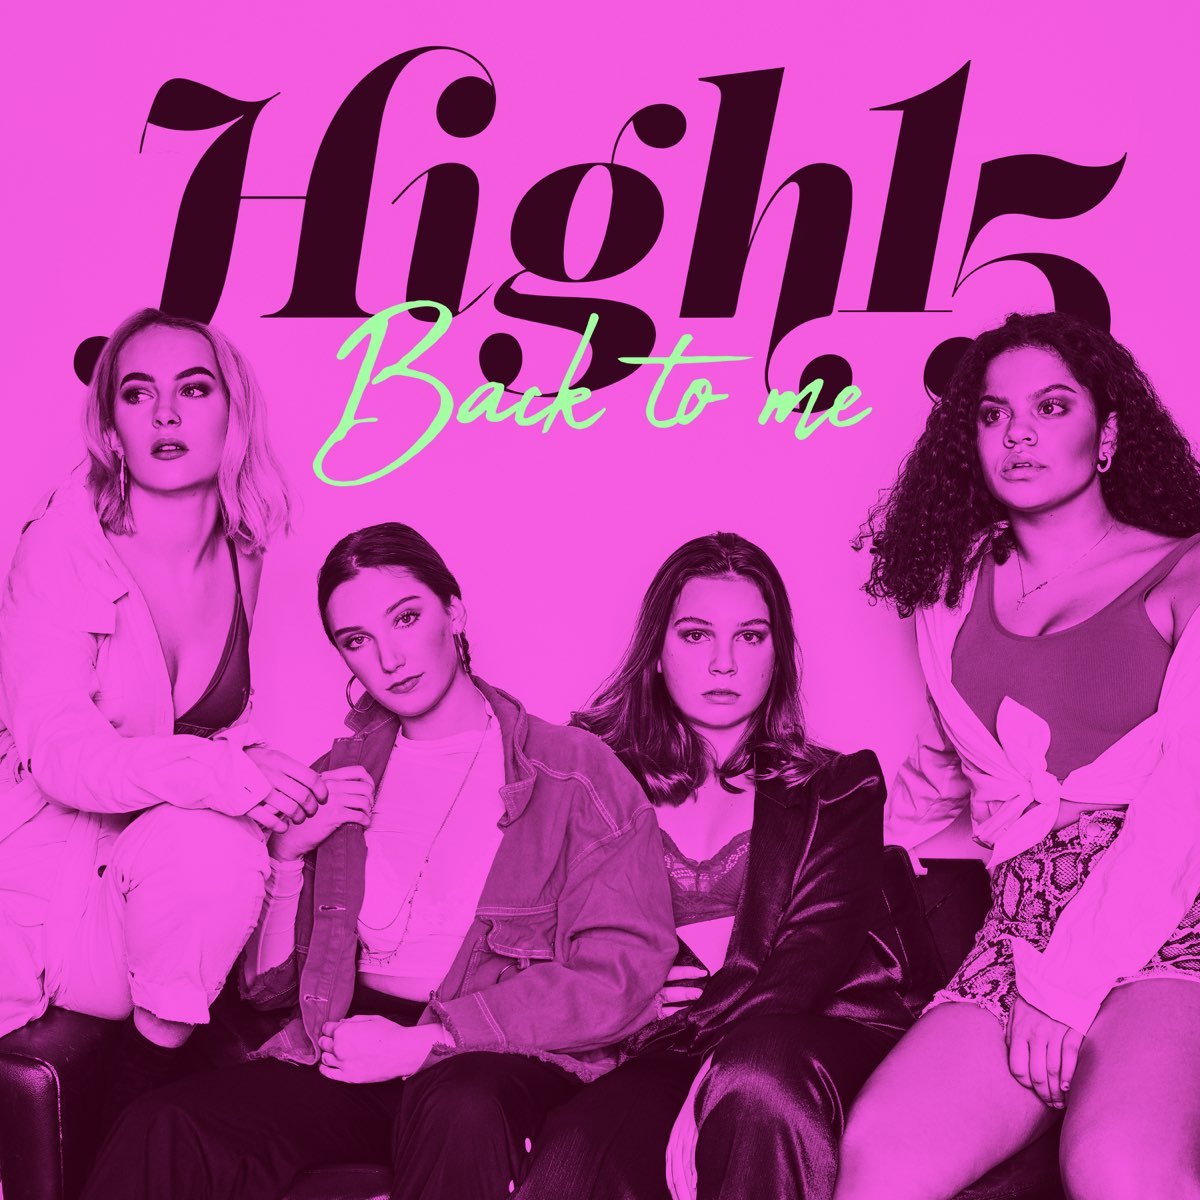 High15 — Back To Me cover artwork